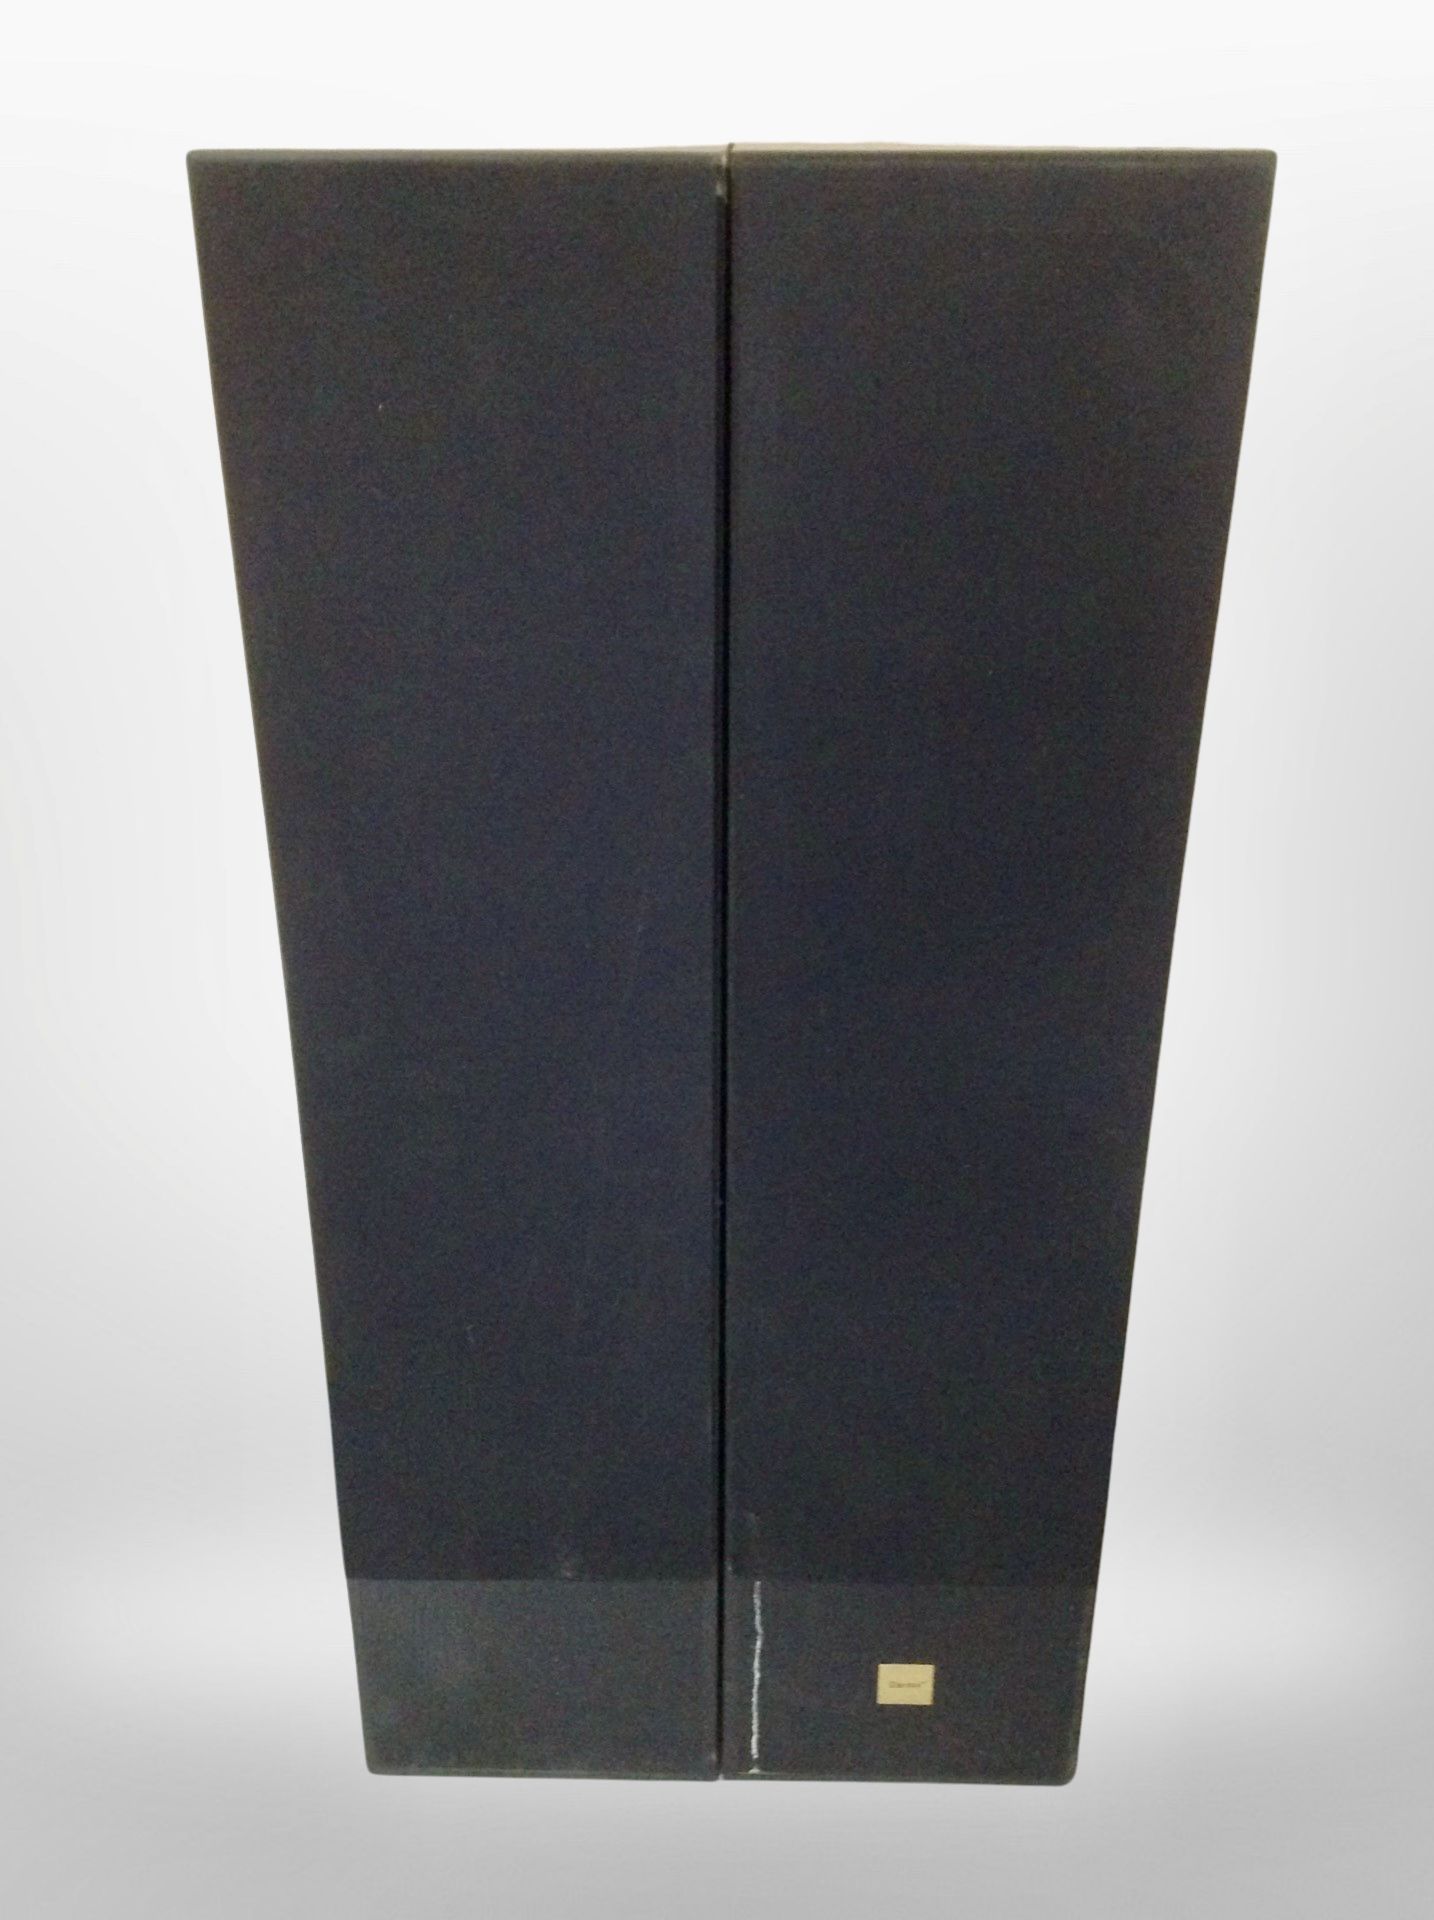 A pair of Dantax floor-standing speakers, height 115cm. CONDITION REPORT: No leads.